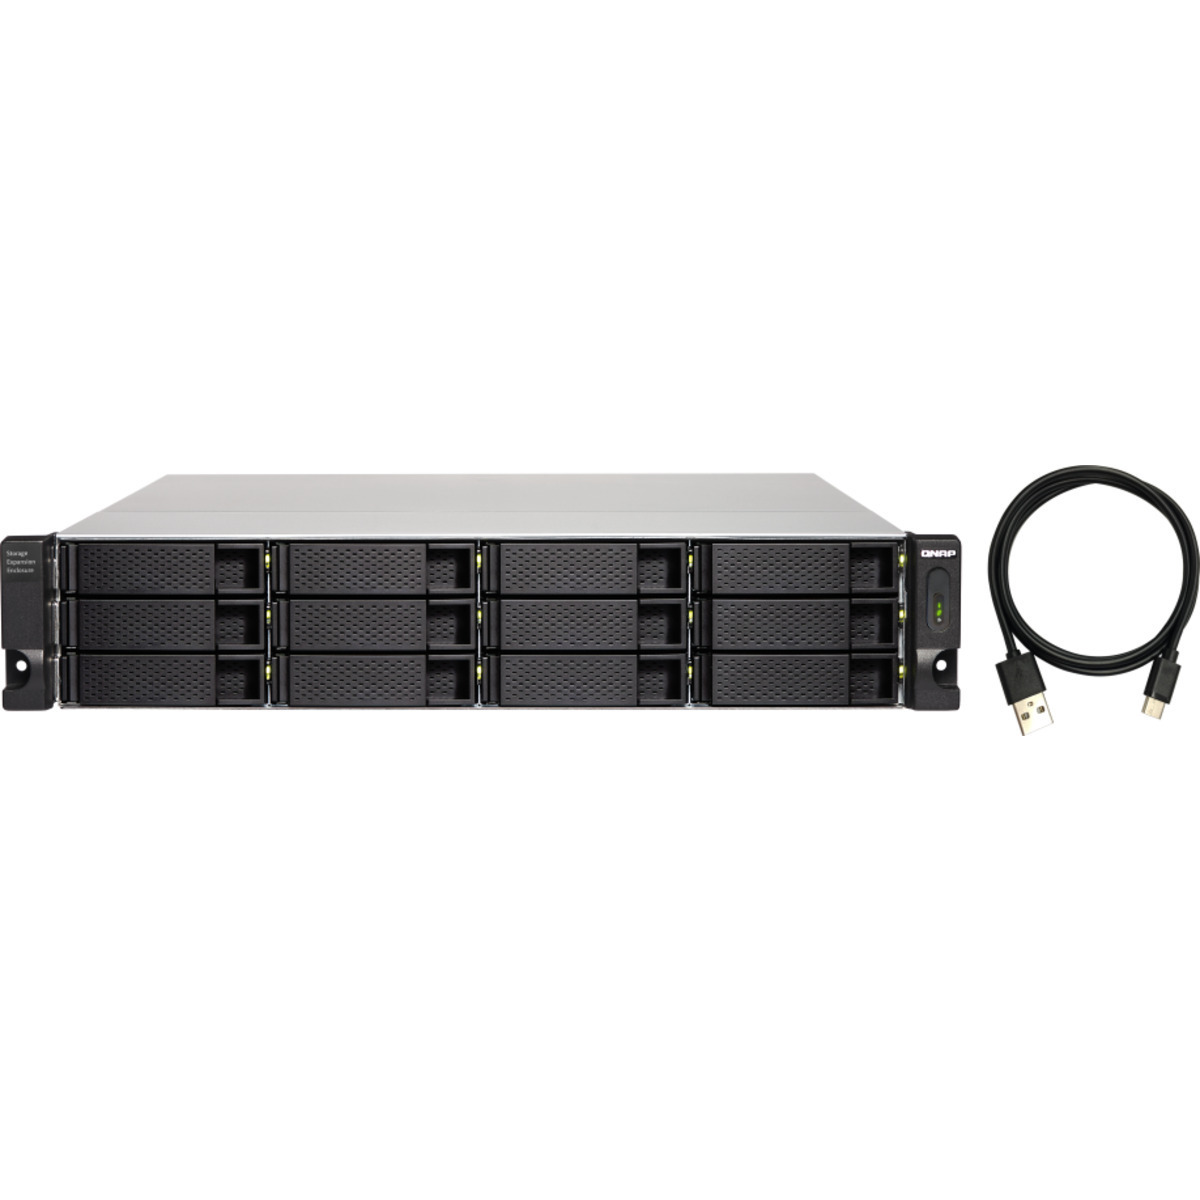 QNAP TL-R1200C-RP External Expansion Drive 108tb 12-Bay RackMount Multimedia / Power User / Business Expansion Enclosure 9x12tb Seagate IronWolf ST12000VN0008 3.5 7200rpm SATA 6Gb/s HDD NAS Class Drives Installed - Burn-In Tested TL-R1200C-RP External Expansion Drive